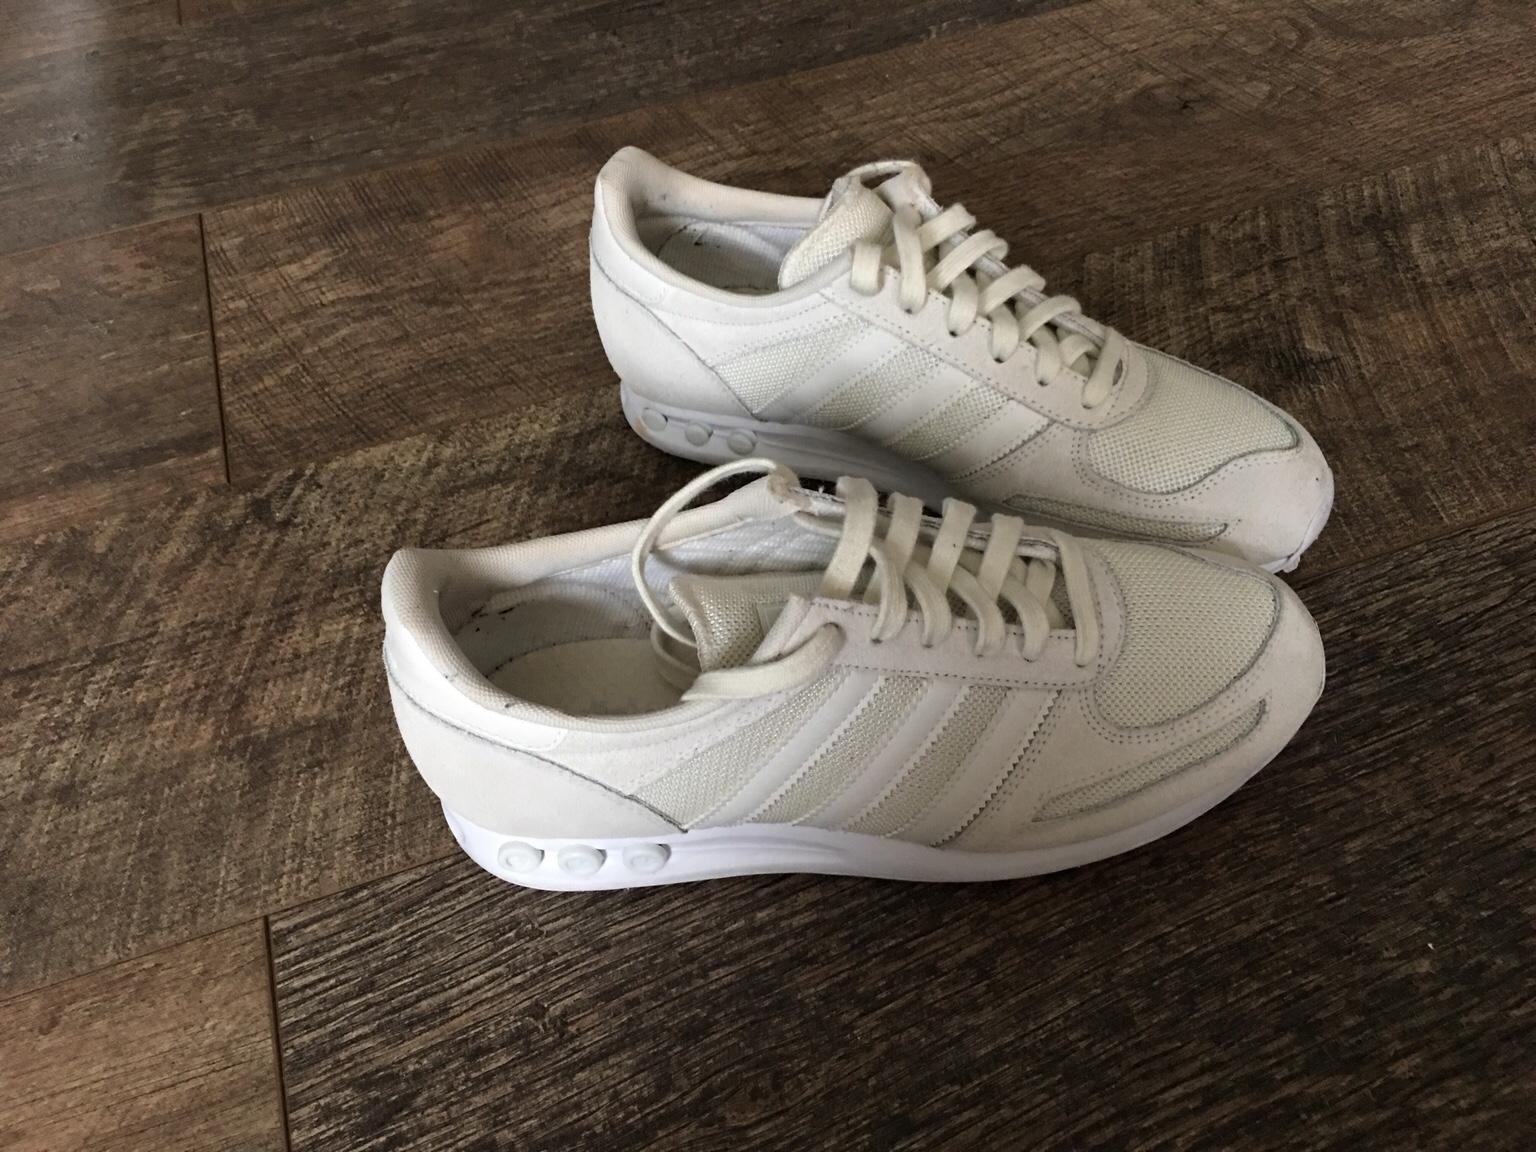 Adidas LA Trainer in Oldham for £30.00 for sale | Shpock